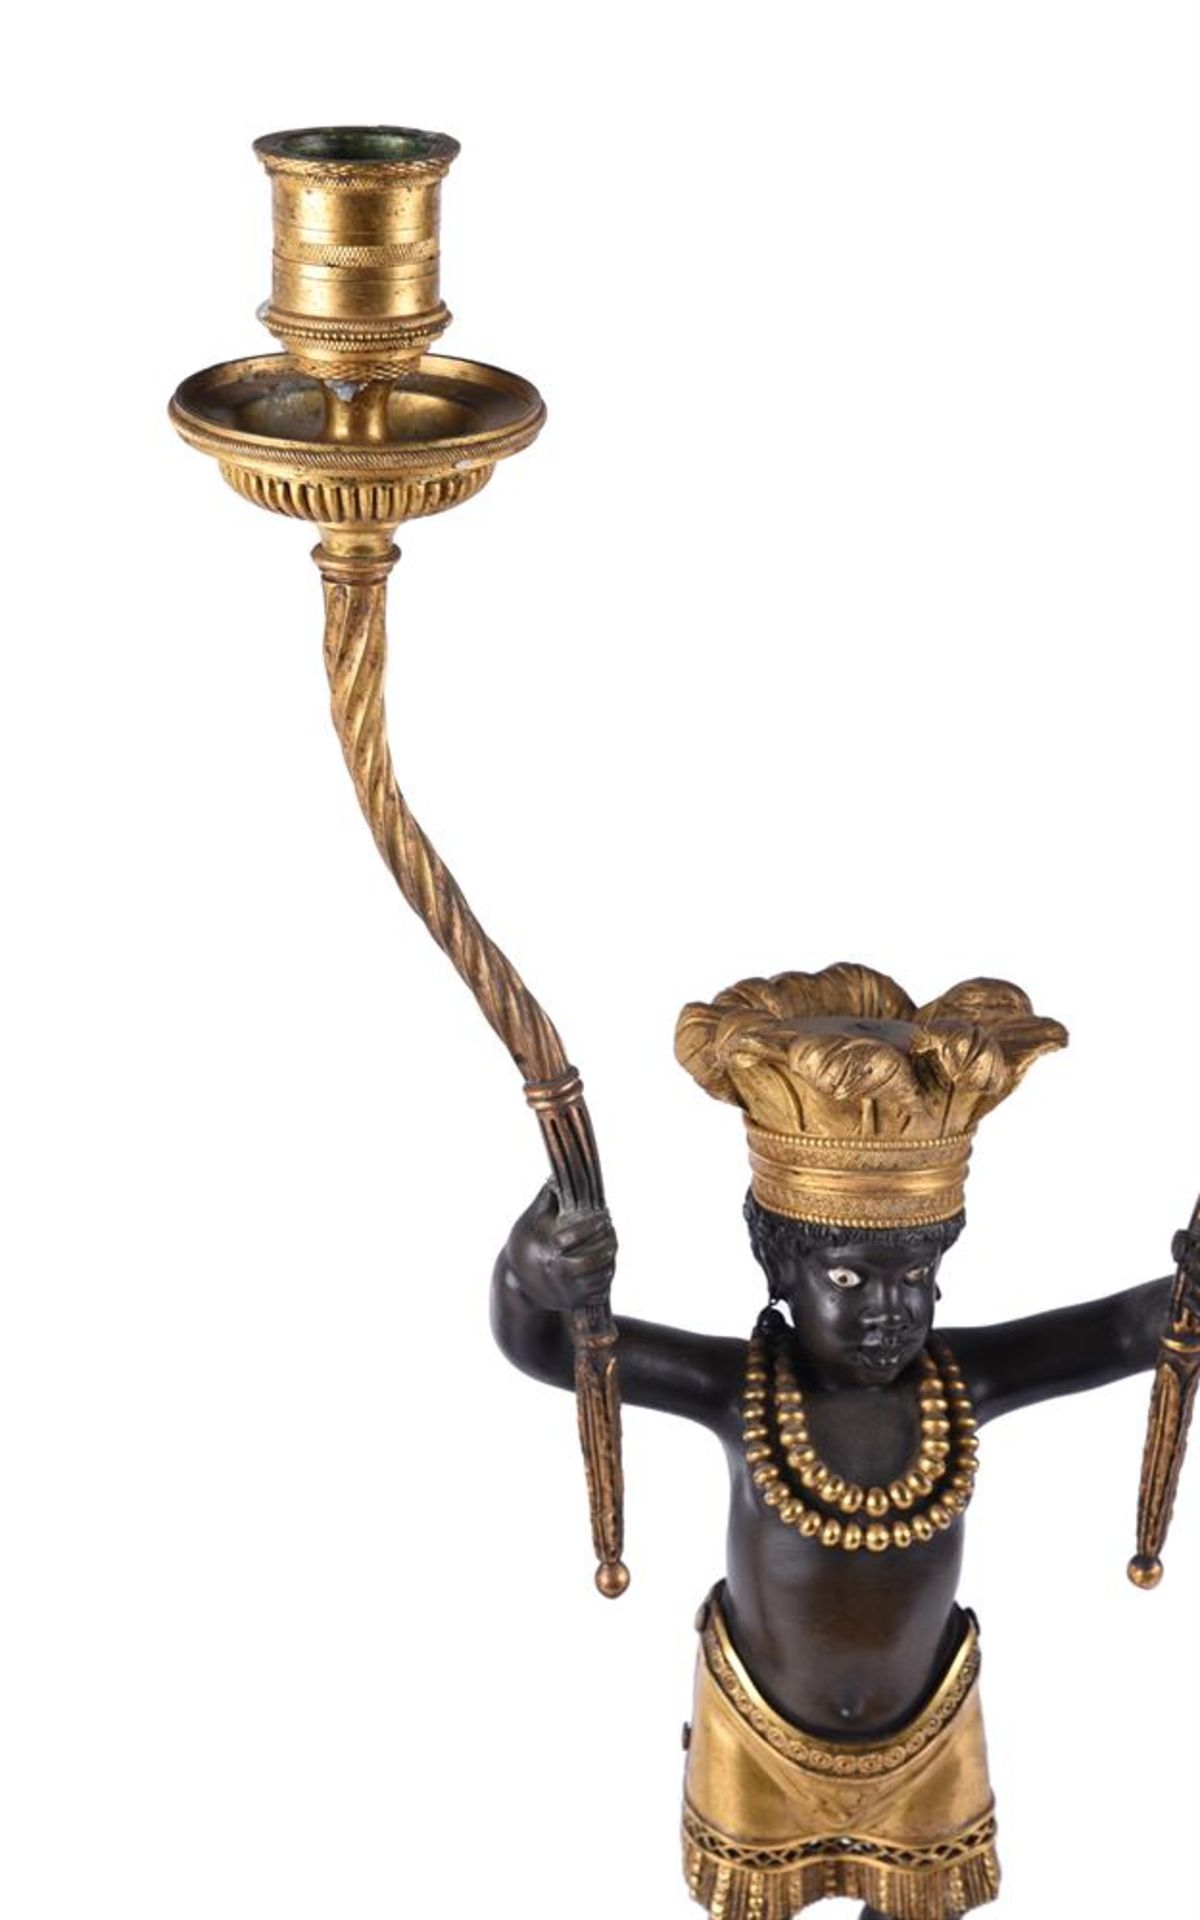 AFTER JEAN-SIMON DEVERBERIE (1764-1824), A RARE PAIR OF ORMOLU AND PATINATED BRONZE CANDELABRA - Image 6 of 7